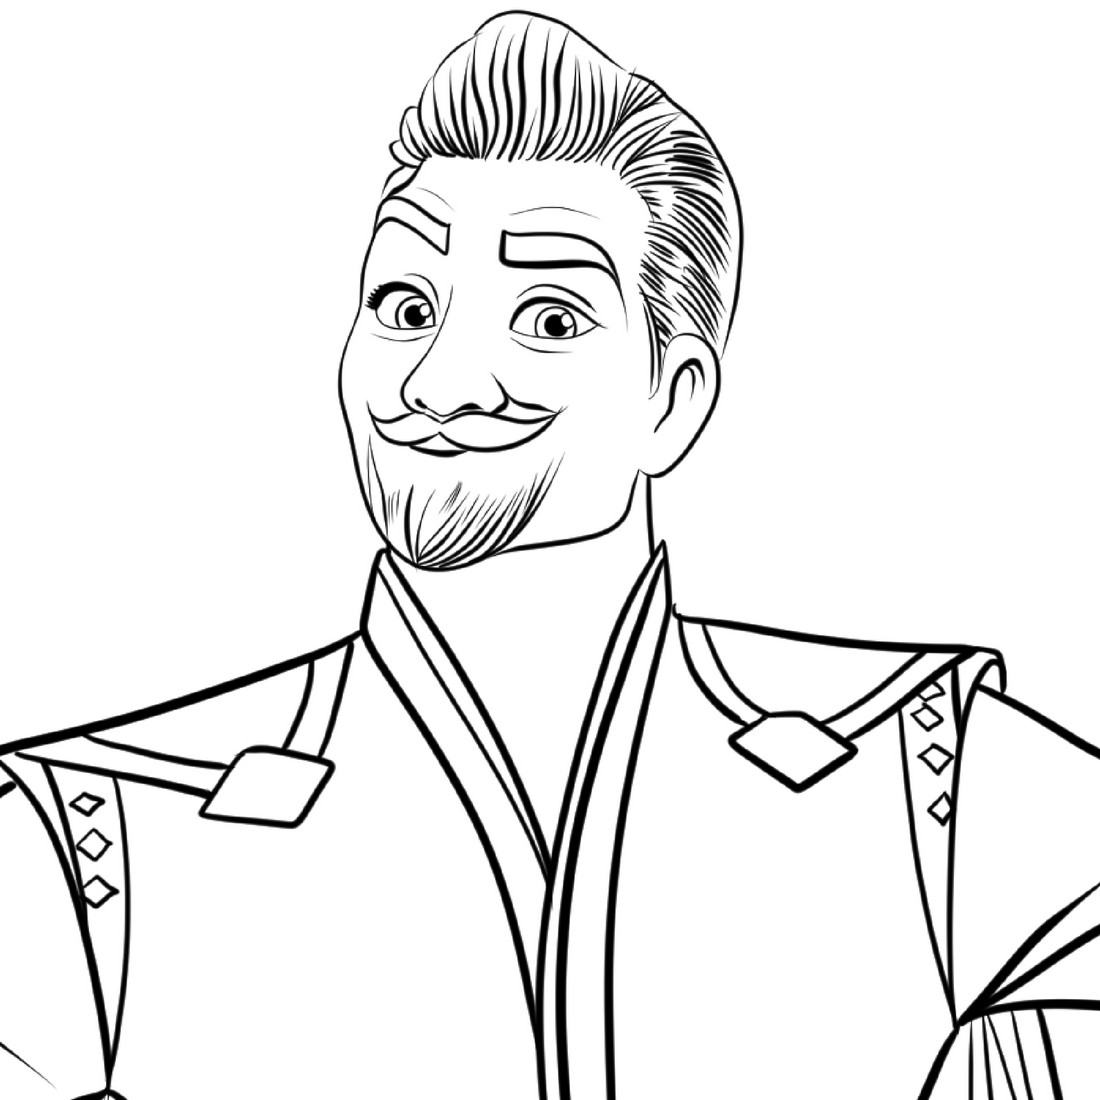 King Magnifico from Wish (Walt Disney Pictures) coloring page to print and coloring